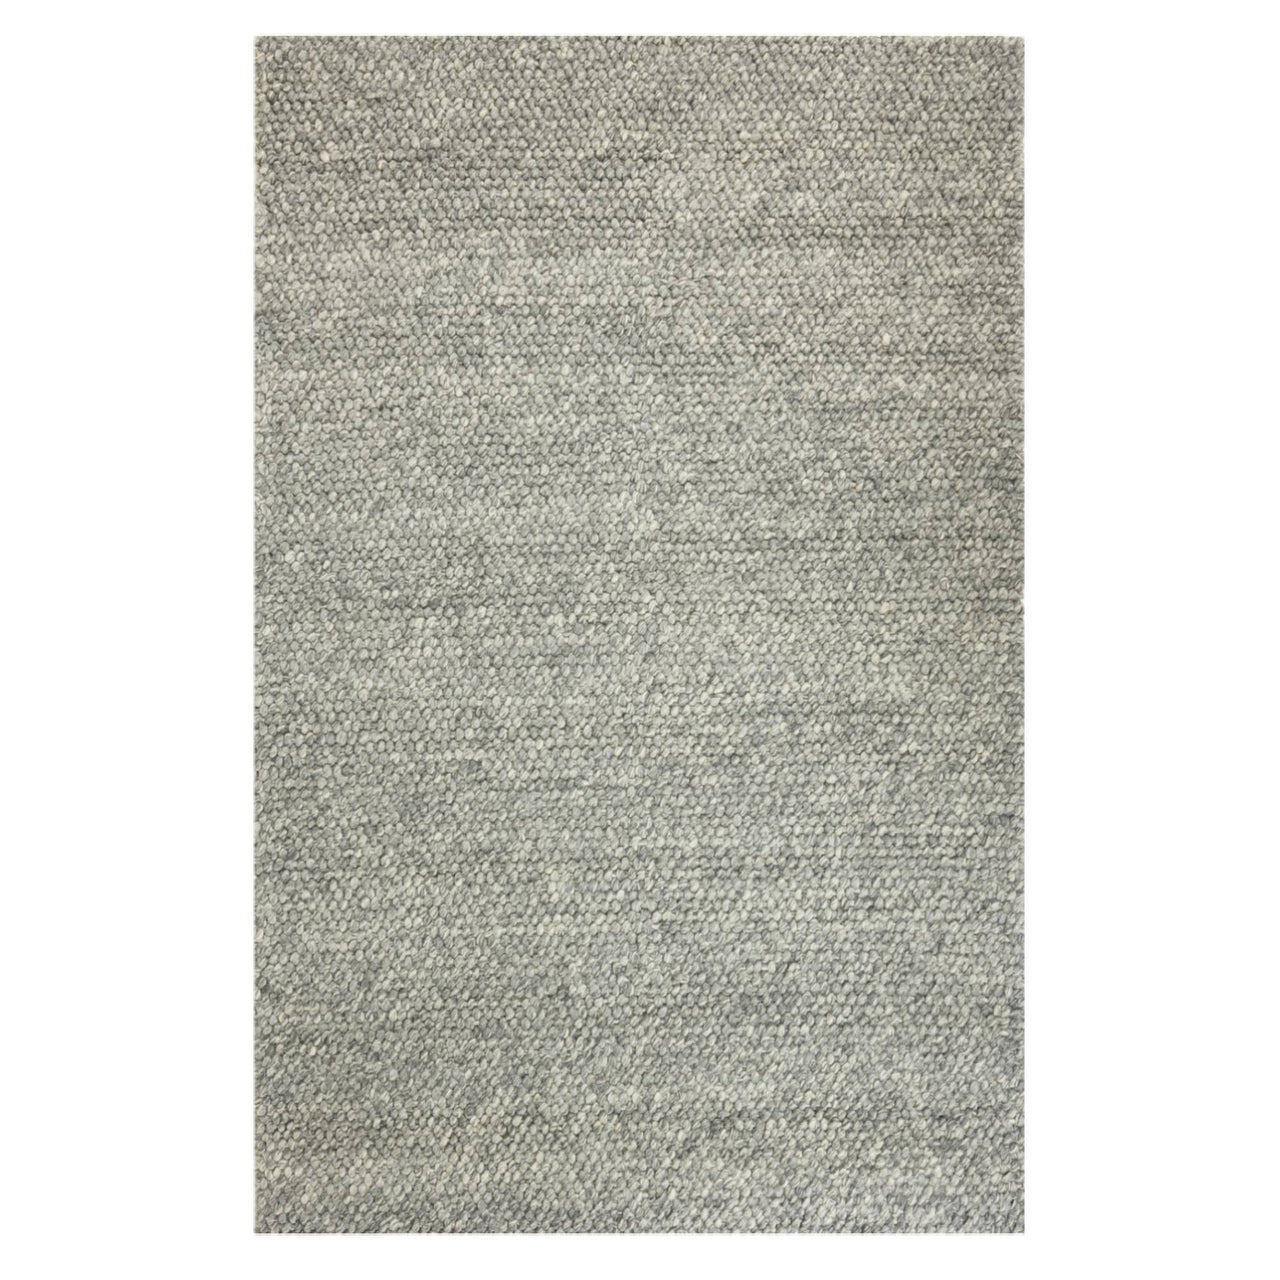 Noughts Weave Wool Rug: Extra Large - 118.1